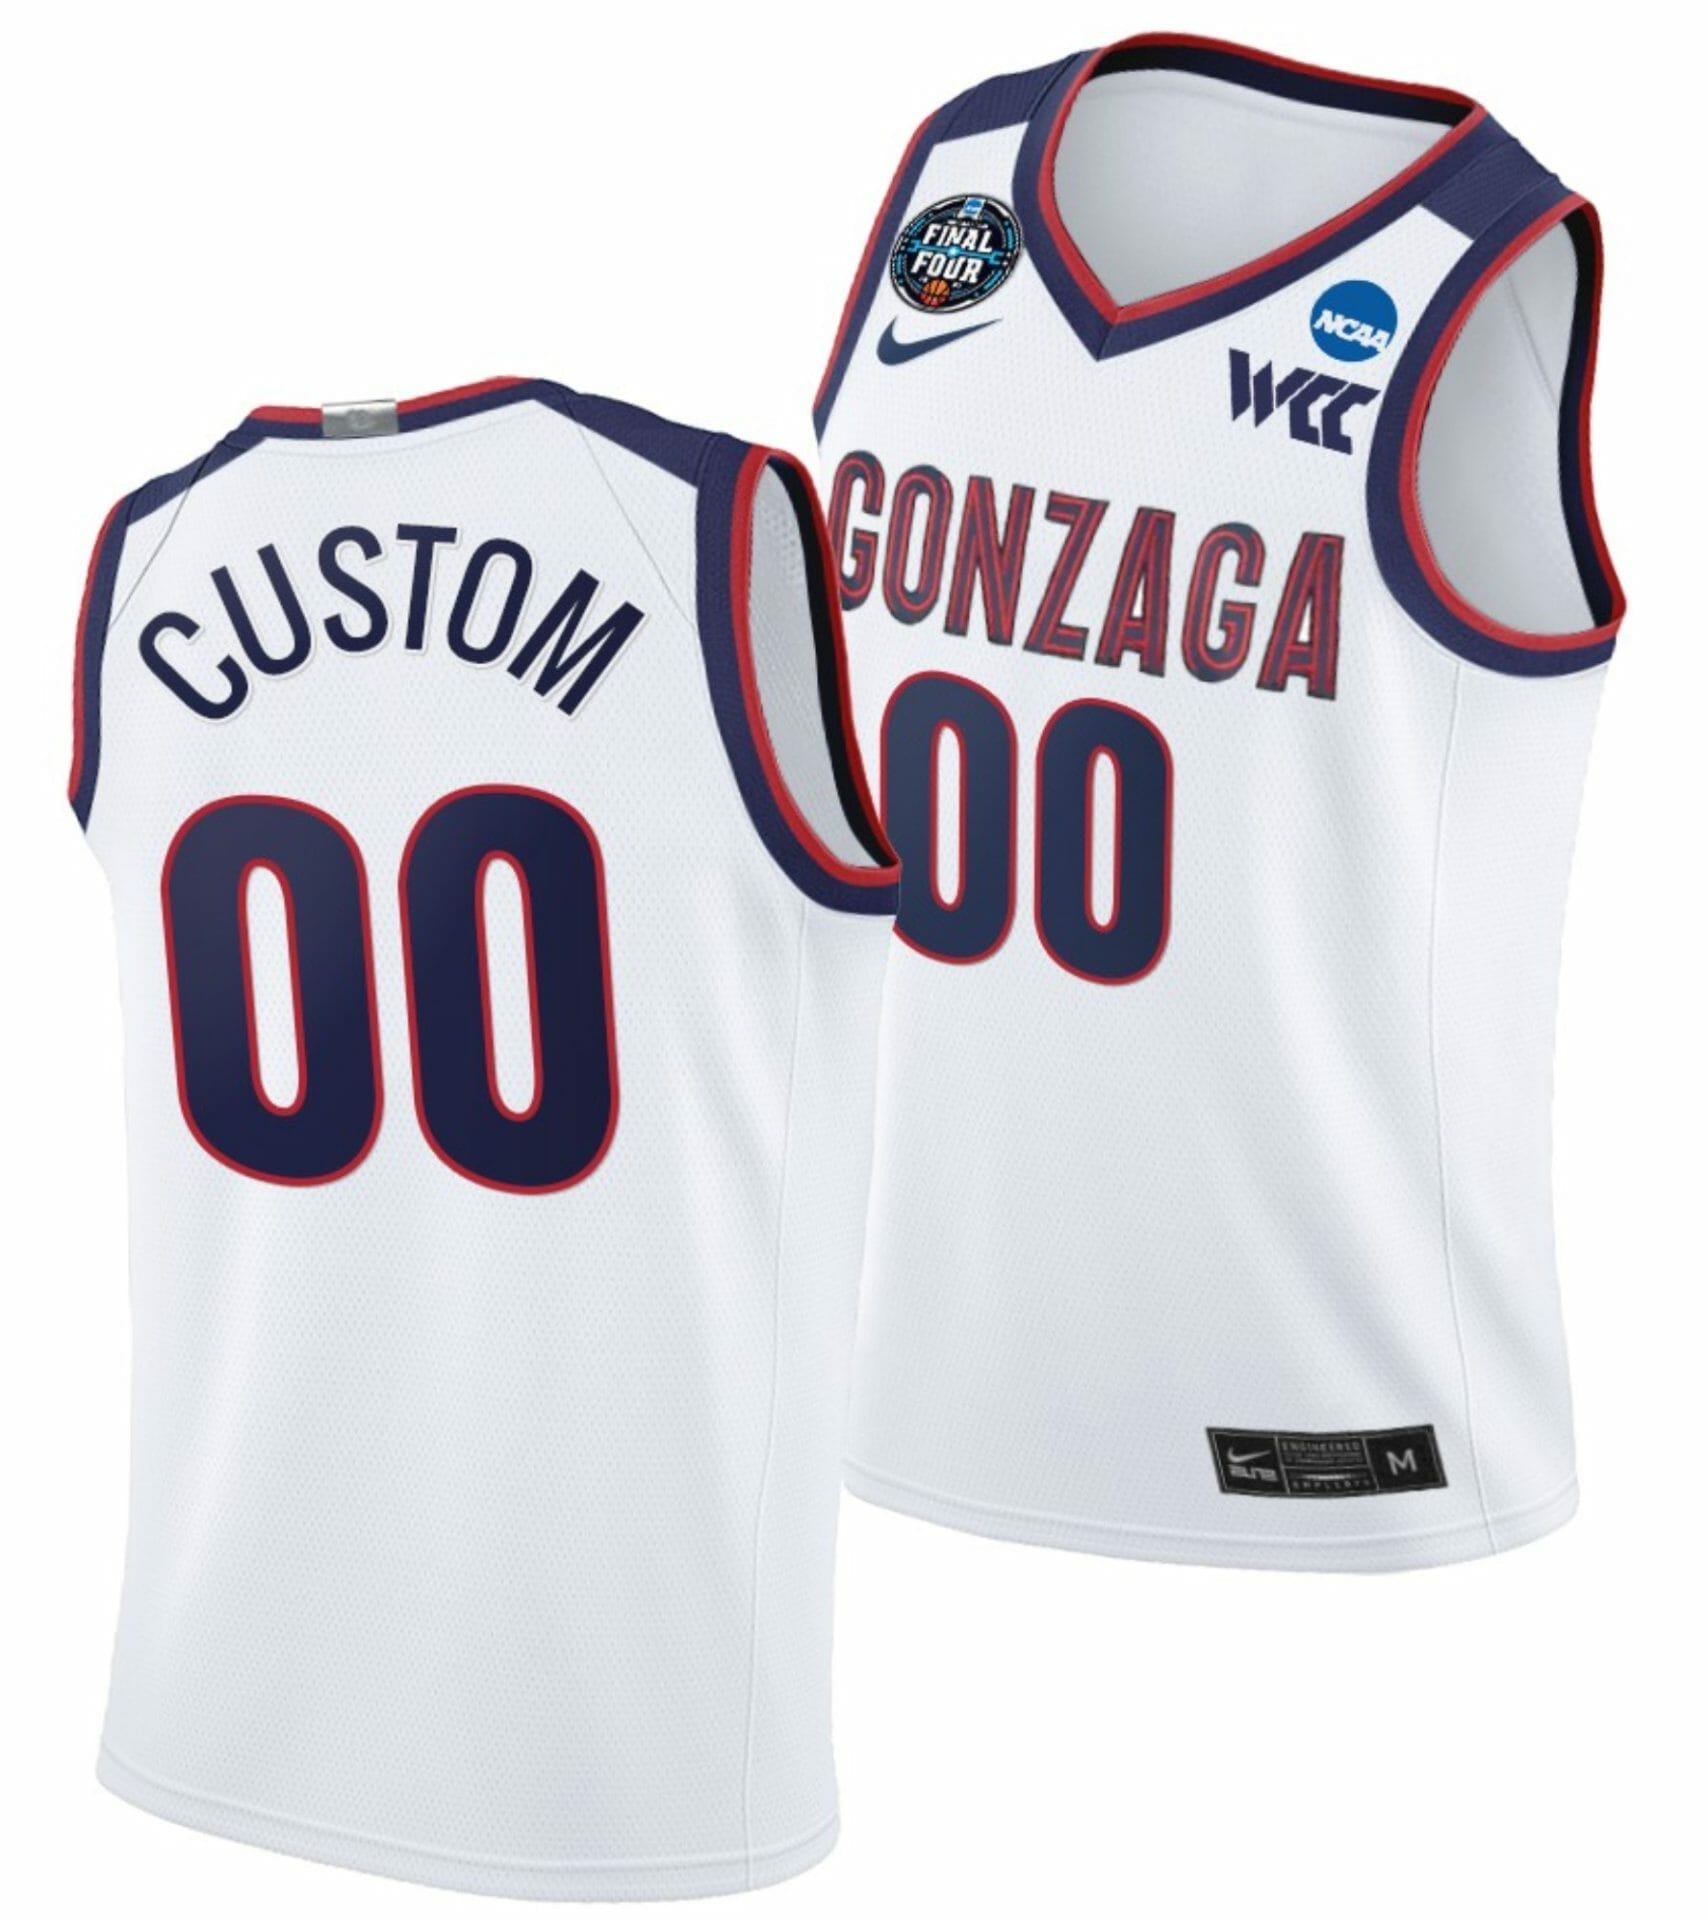 Custom College Basketball Jerseys San Diego State Aztecs Jersey Name and Number 2023 NCAA Final Four White